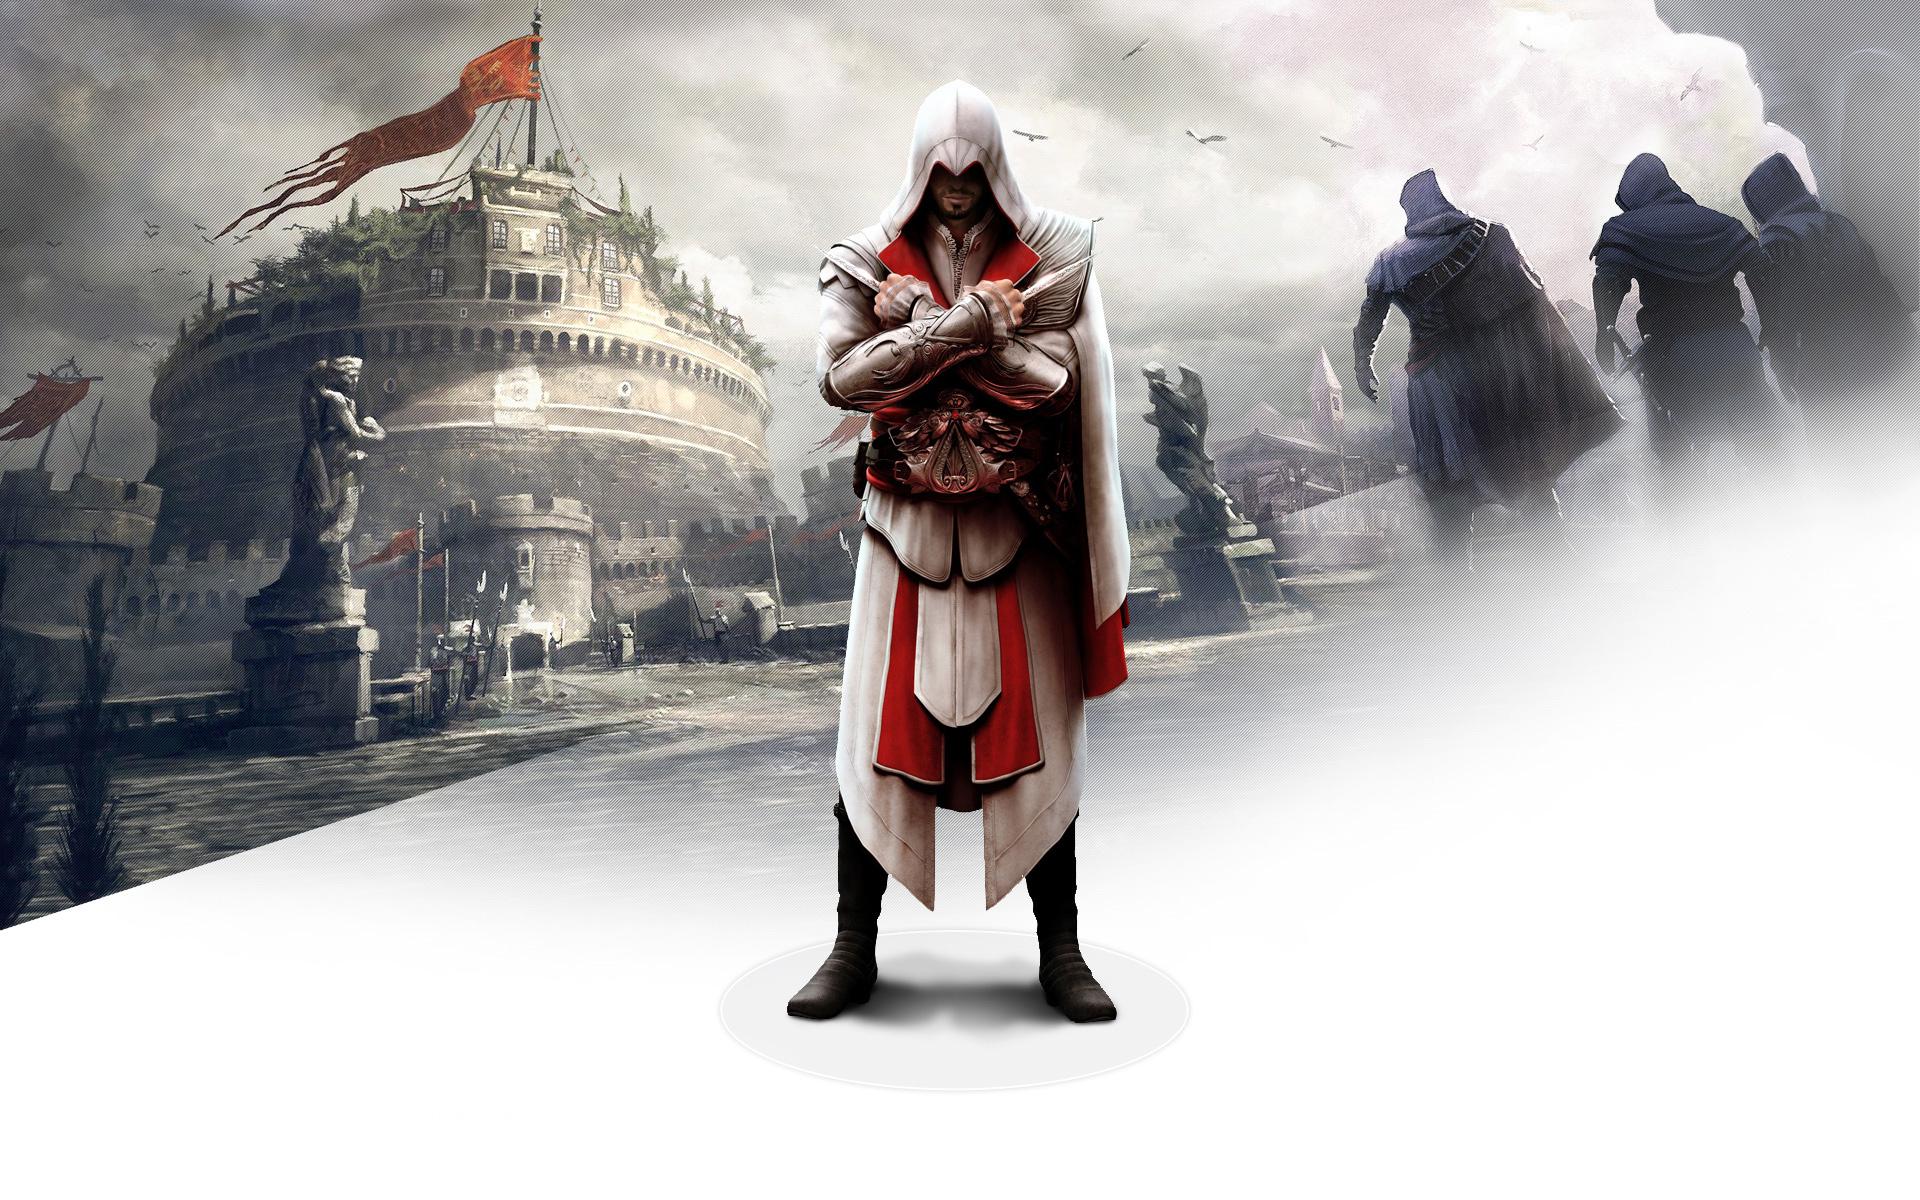 Ezio 4K wallpaper for your desktop or mobile screen free and easy